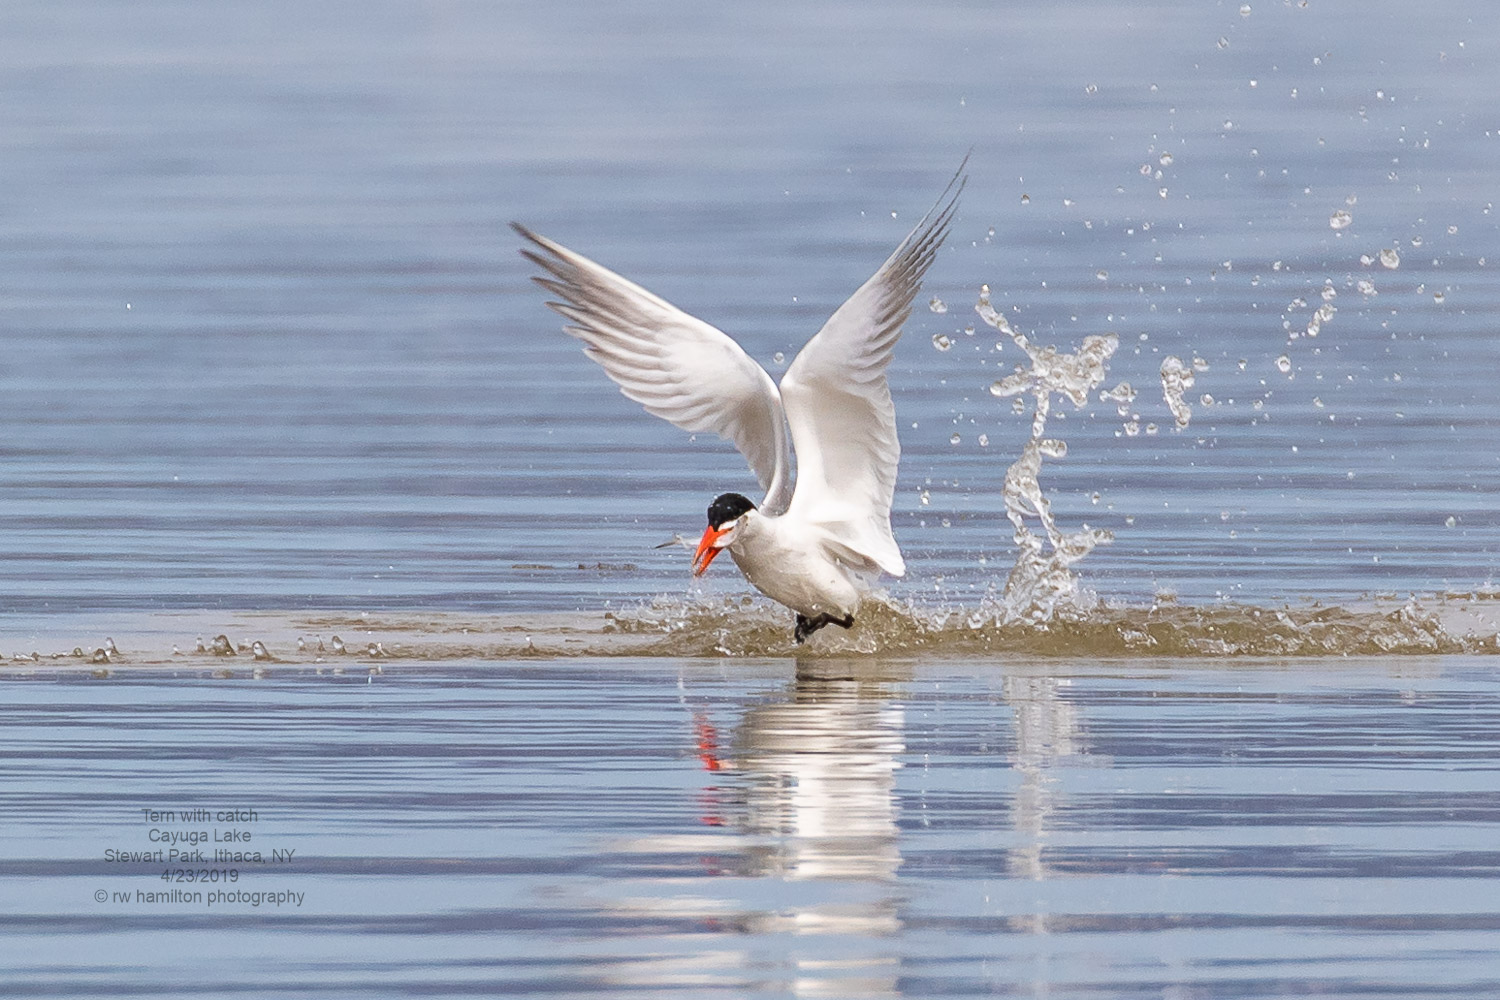 Tern with catch